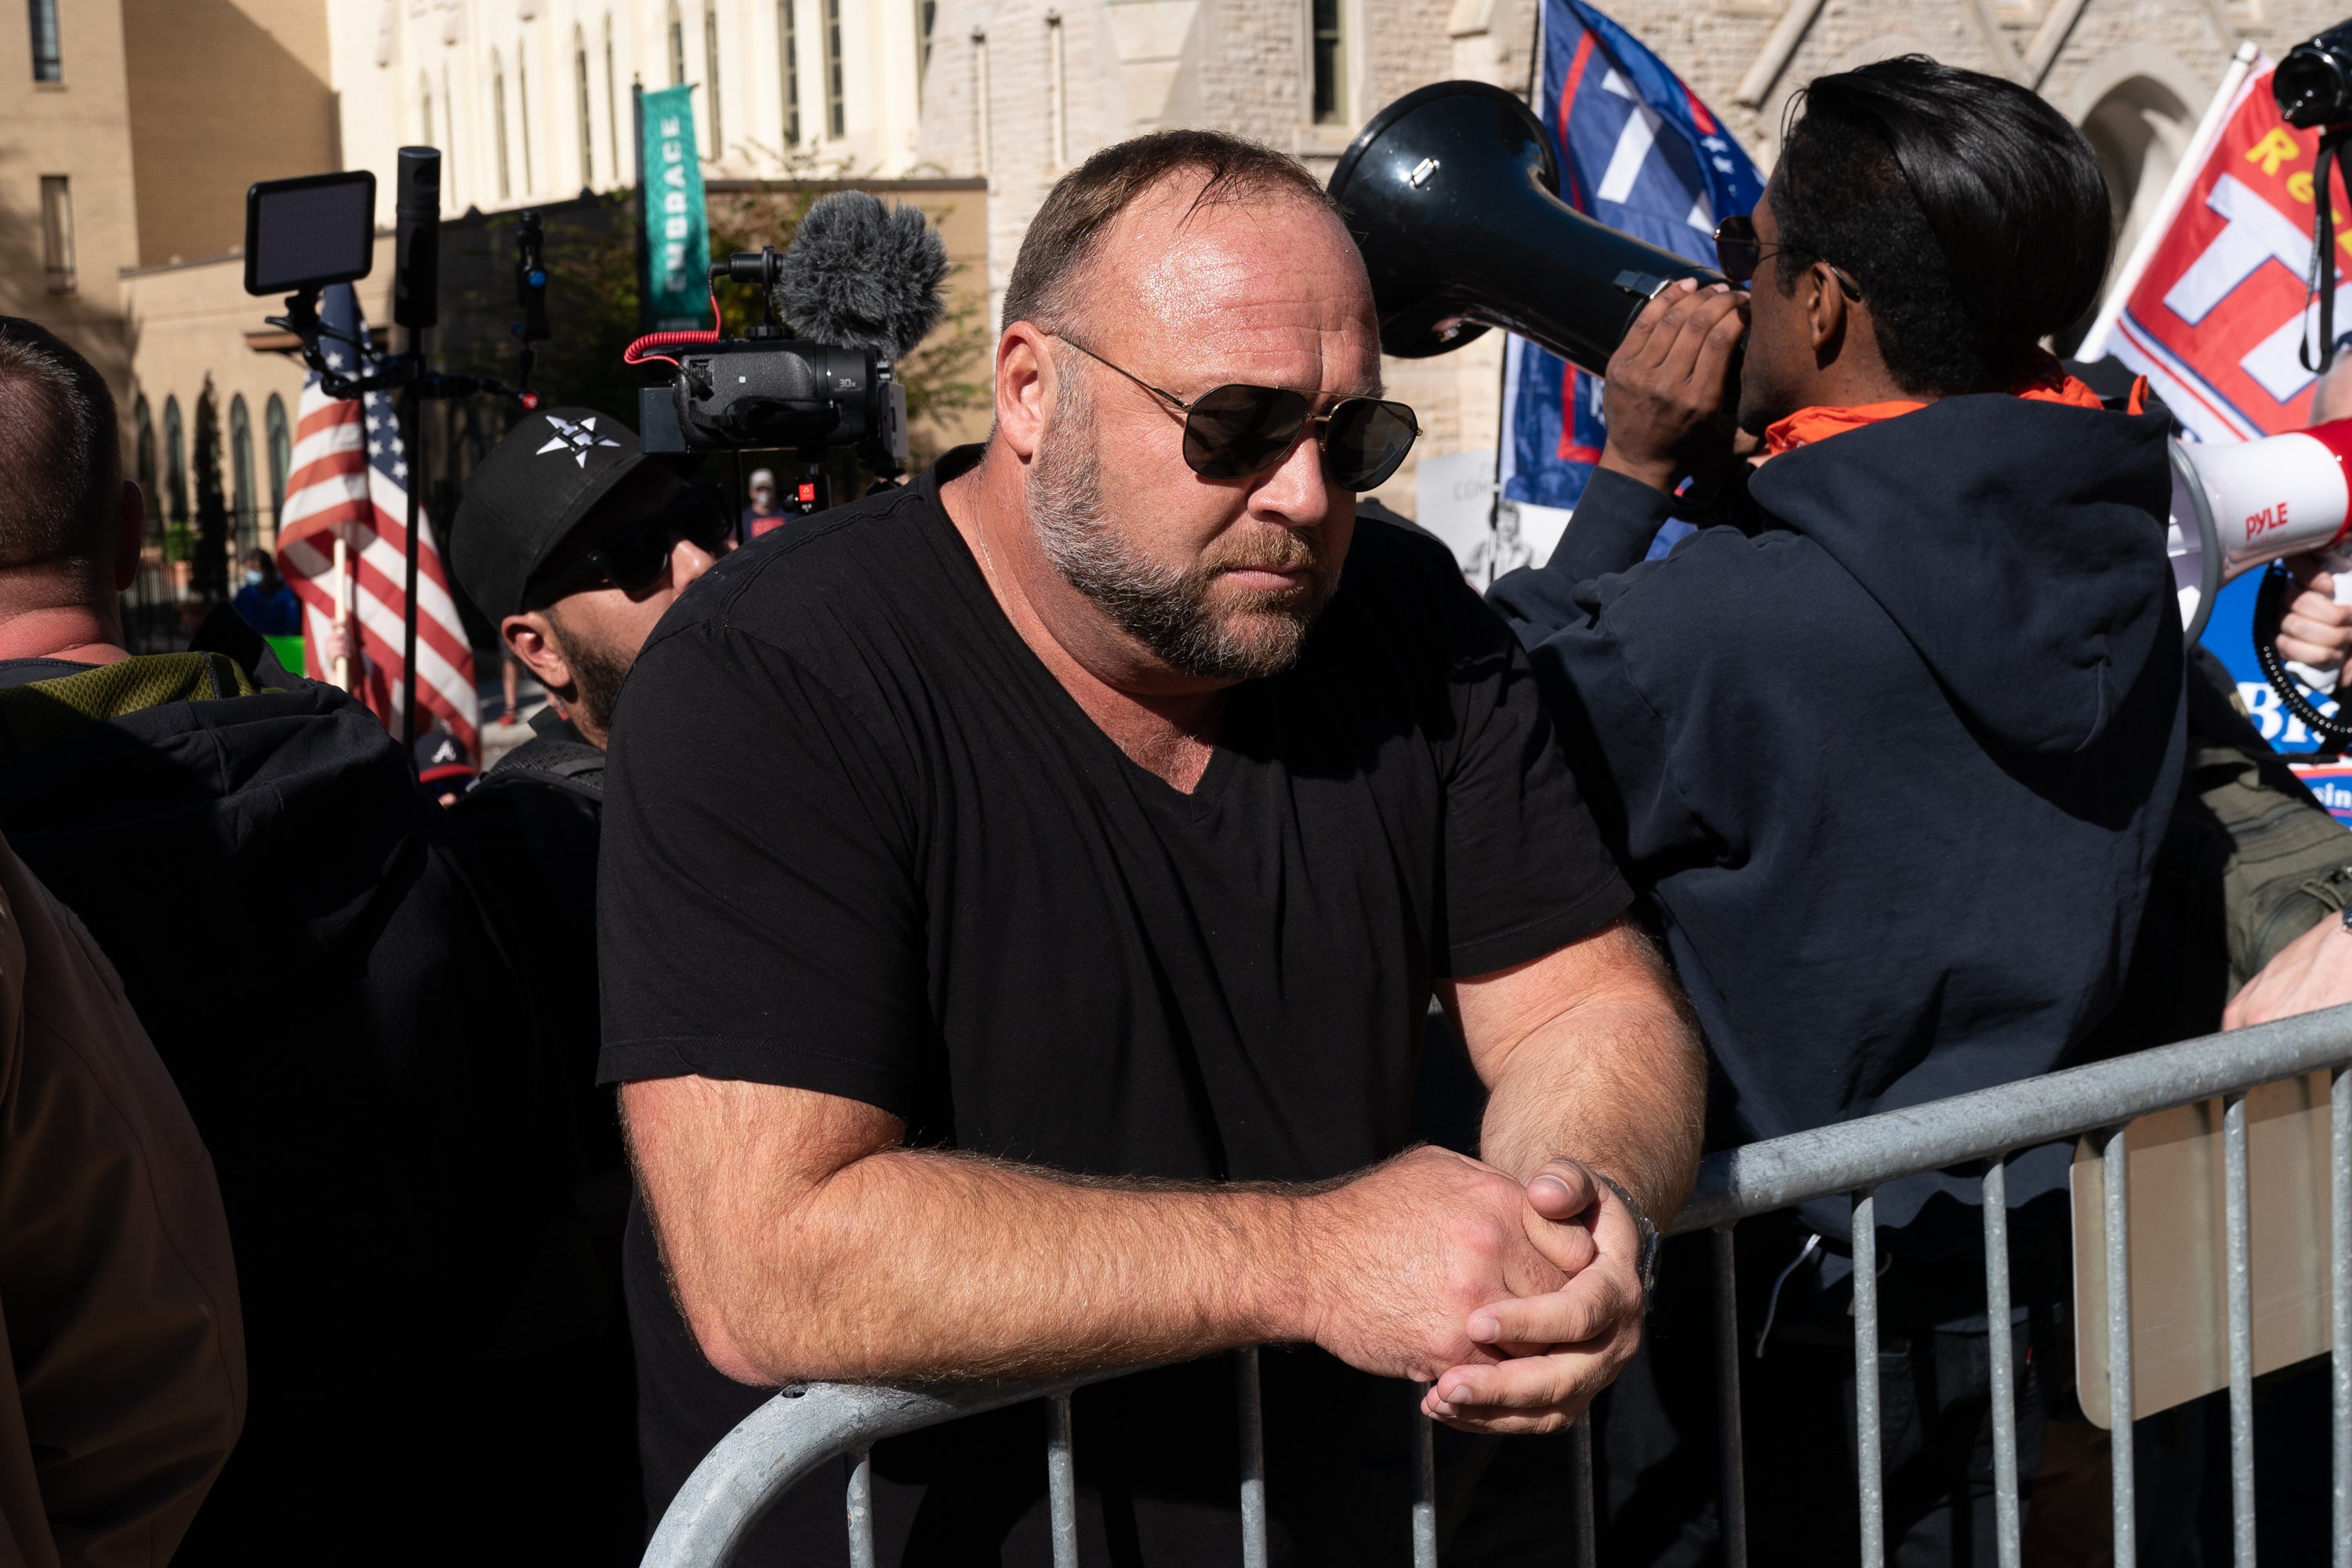 Alex Jones has already been found liable for defamation by the Texas court